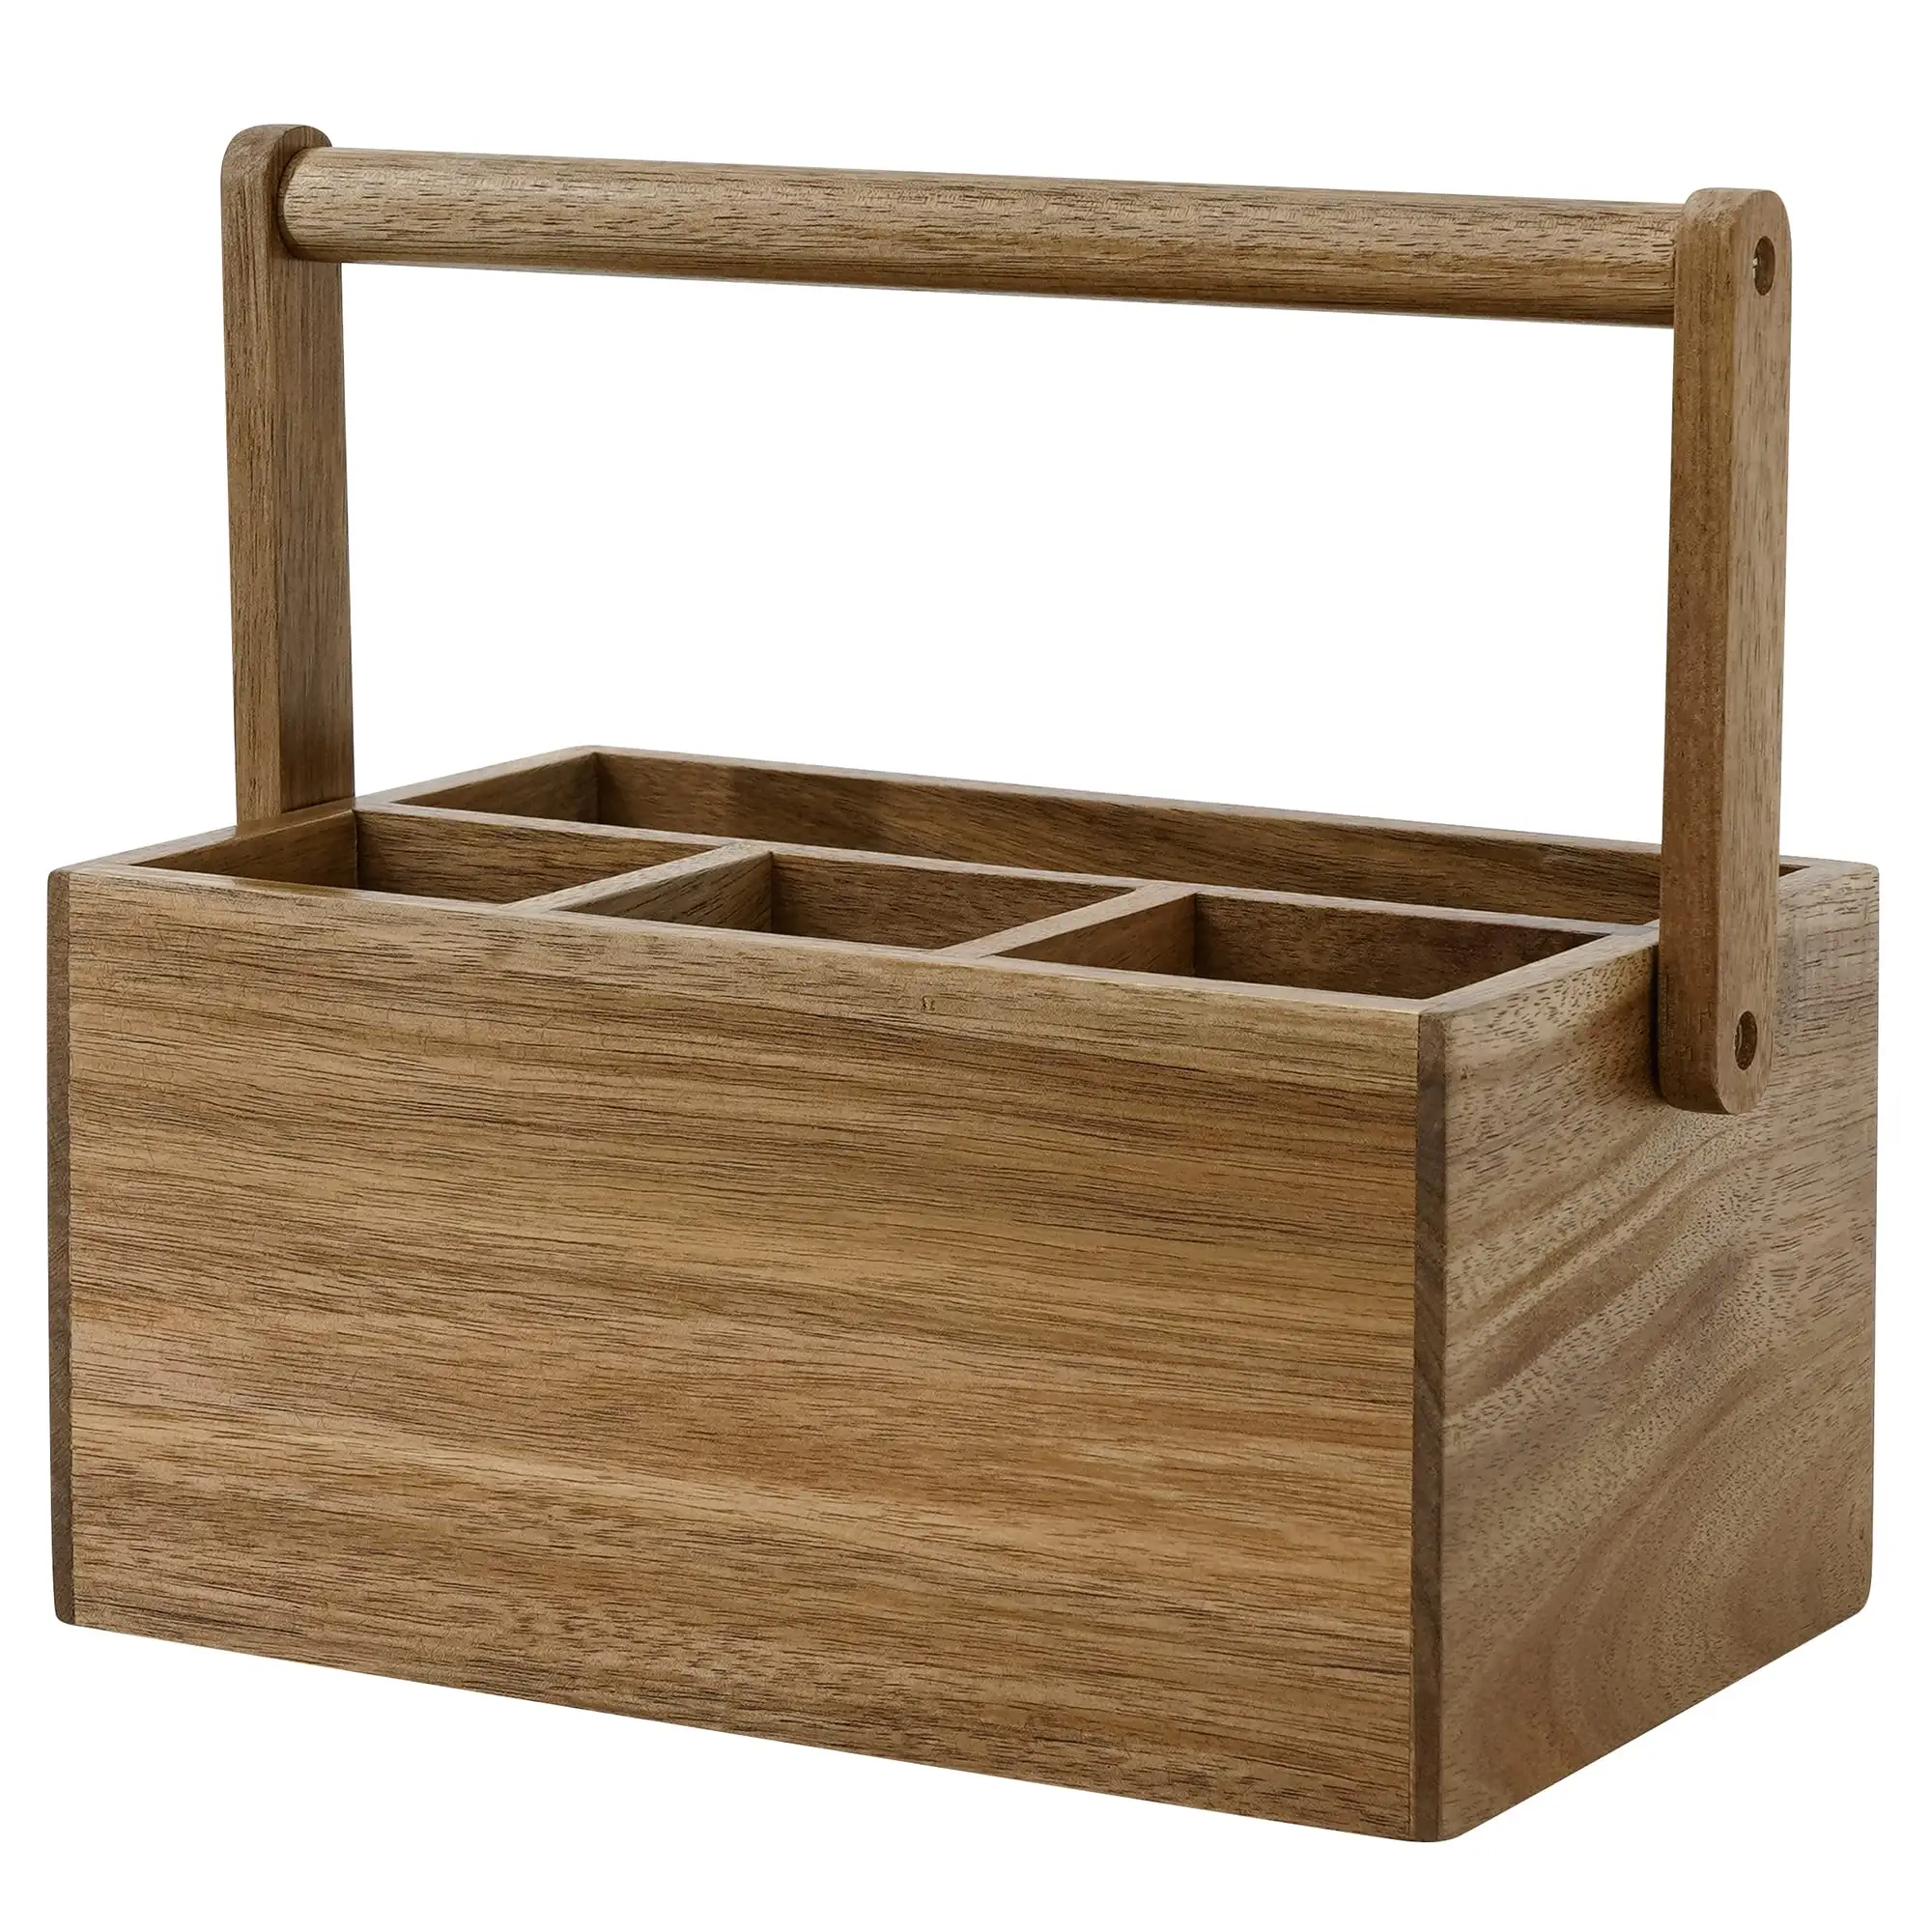 Acacia Silverware Caddy with Handle, Wooden Utensil Holder, Mulip-pose Organizer for Kitchen, Office, Bathroom, Bedroom